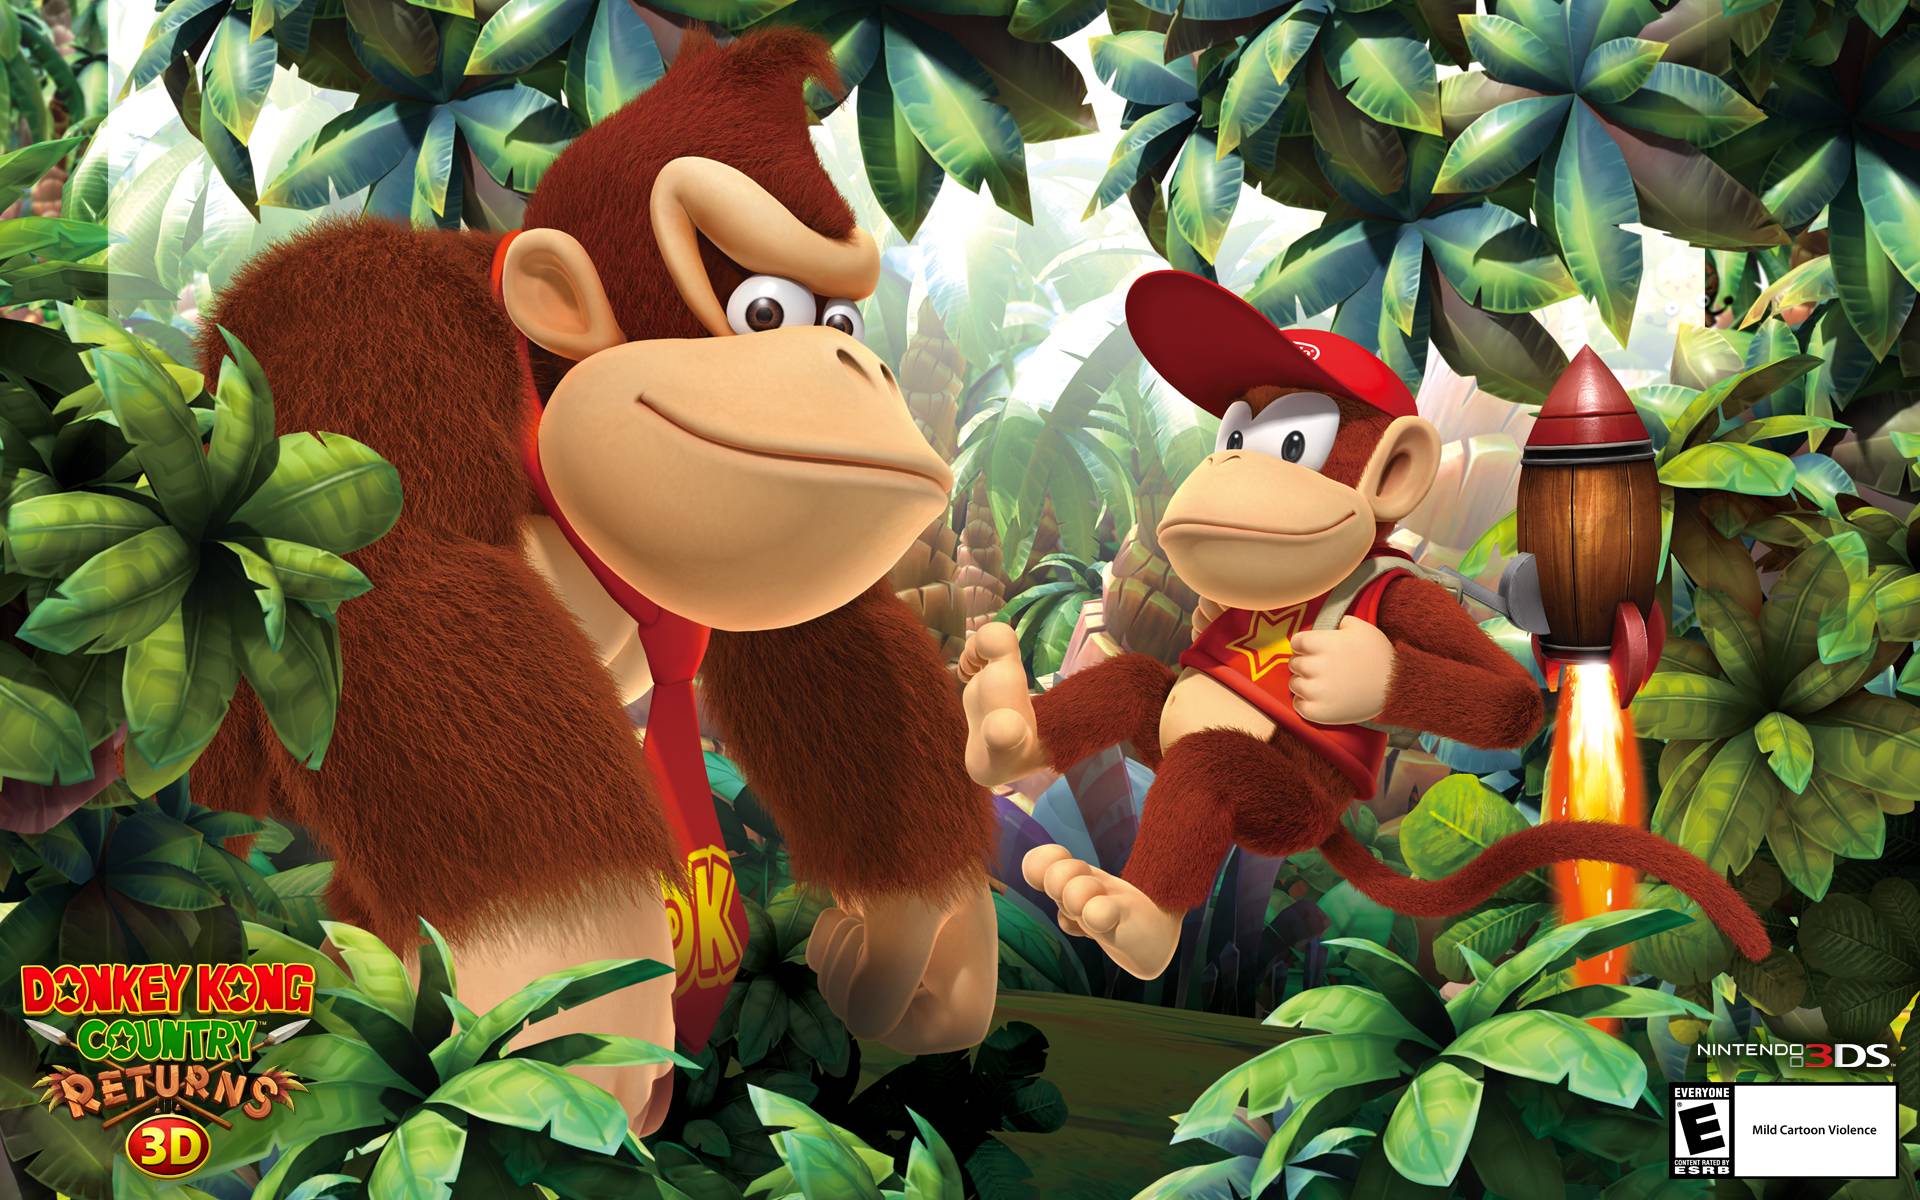 donkey kong country returns iso for wii